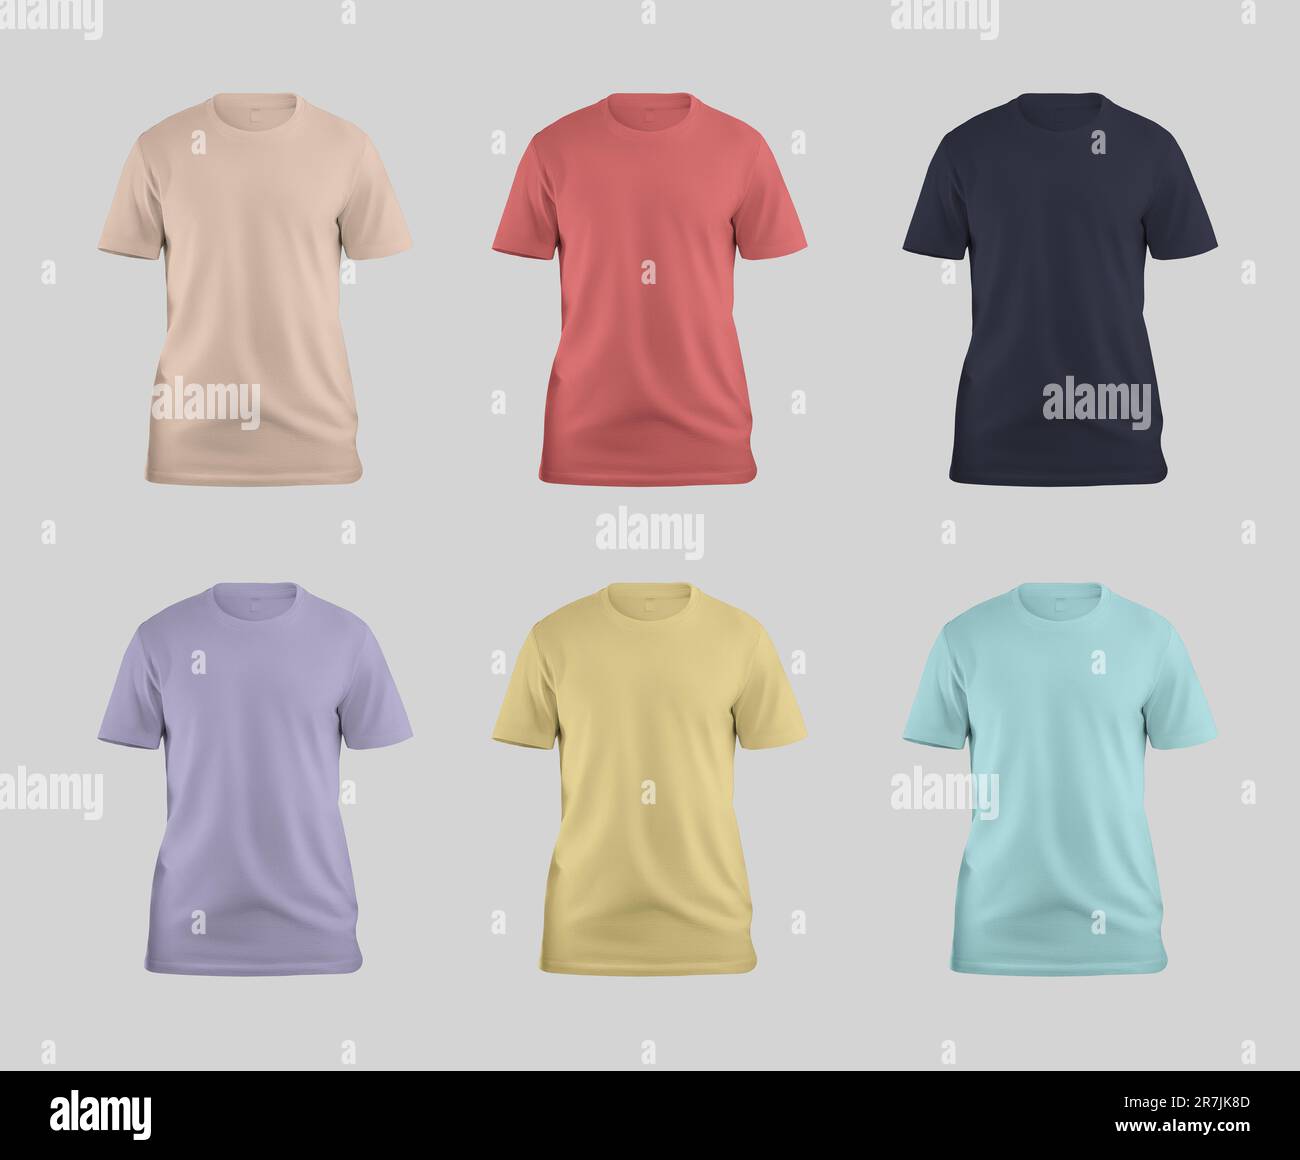 Mockup of bright t-shirts 3D rendering, fashion unisex clothes isolated on background, front. Stylish men's shirt template for design, pattern, brand, Stock Photo